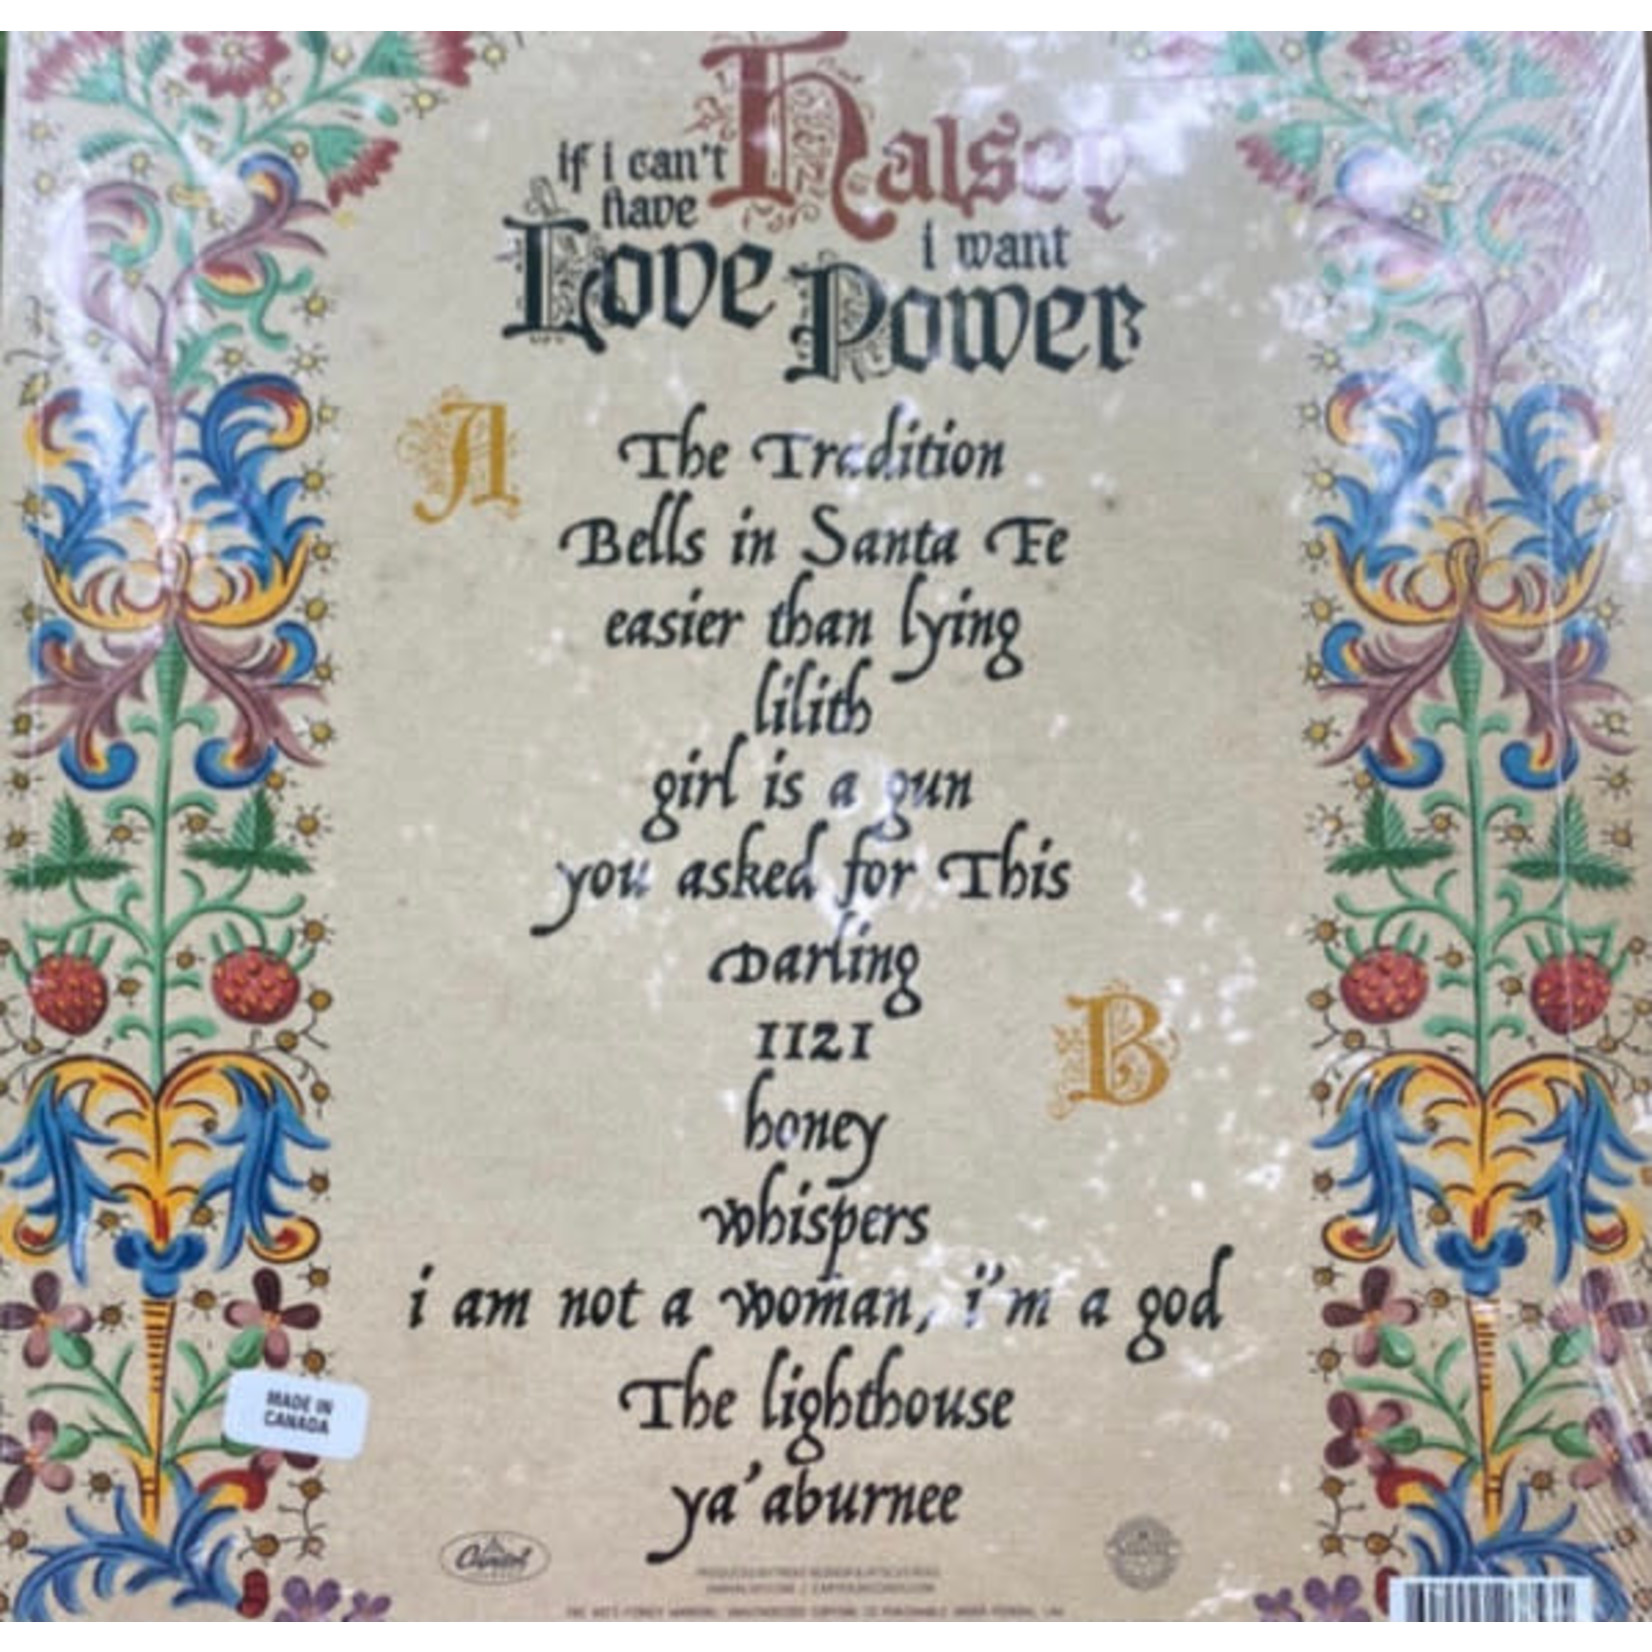 Capitol Halsey - If I Can't Have Love, I Want Power (LP) [Olive Green Tour Edition]